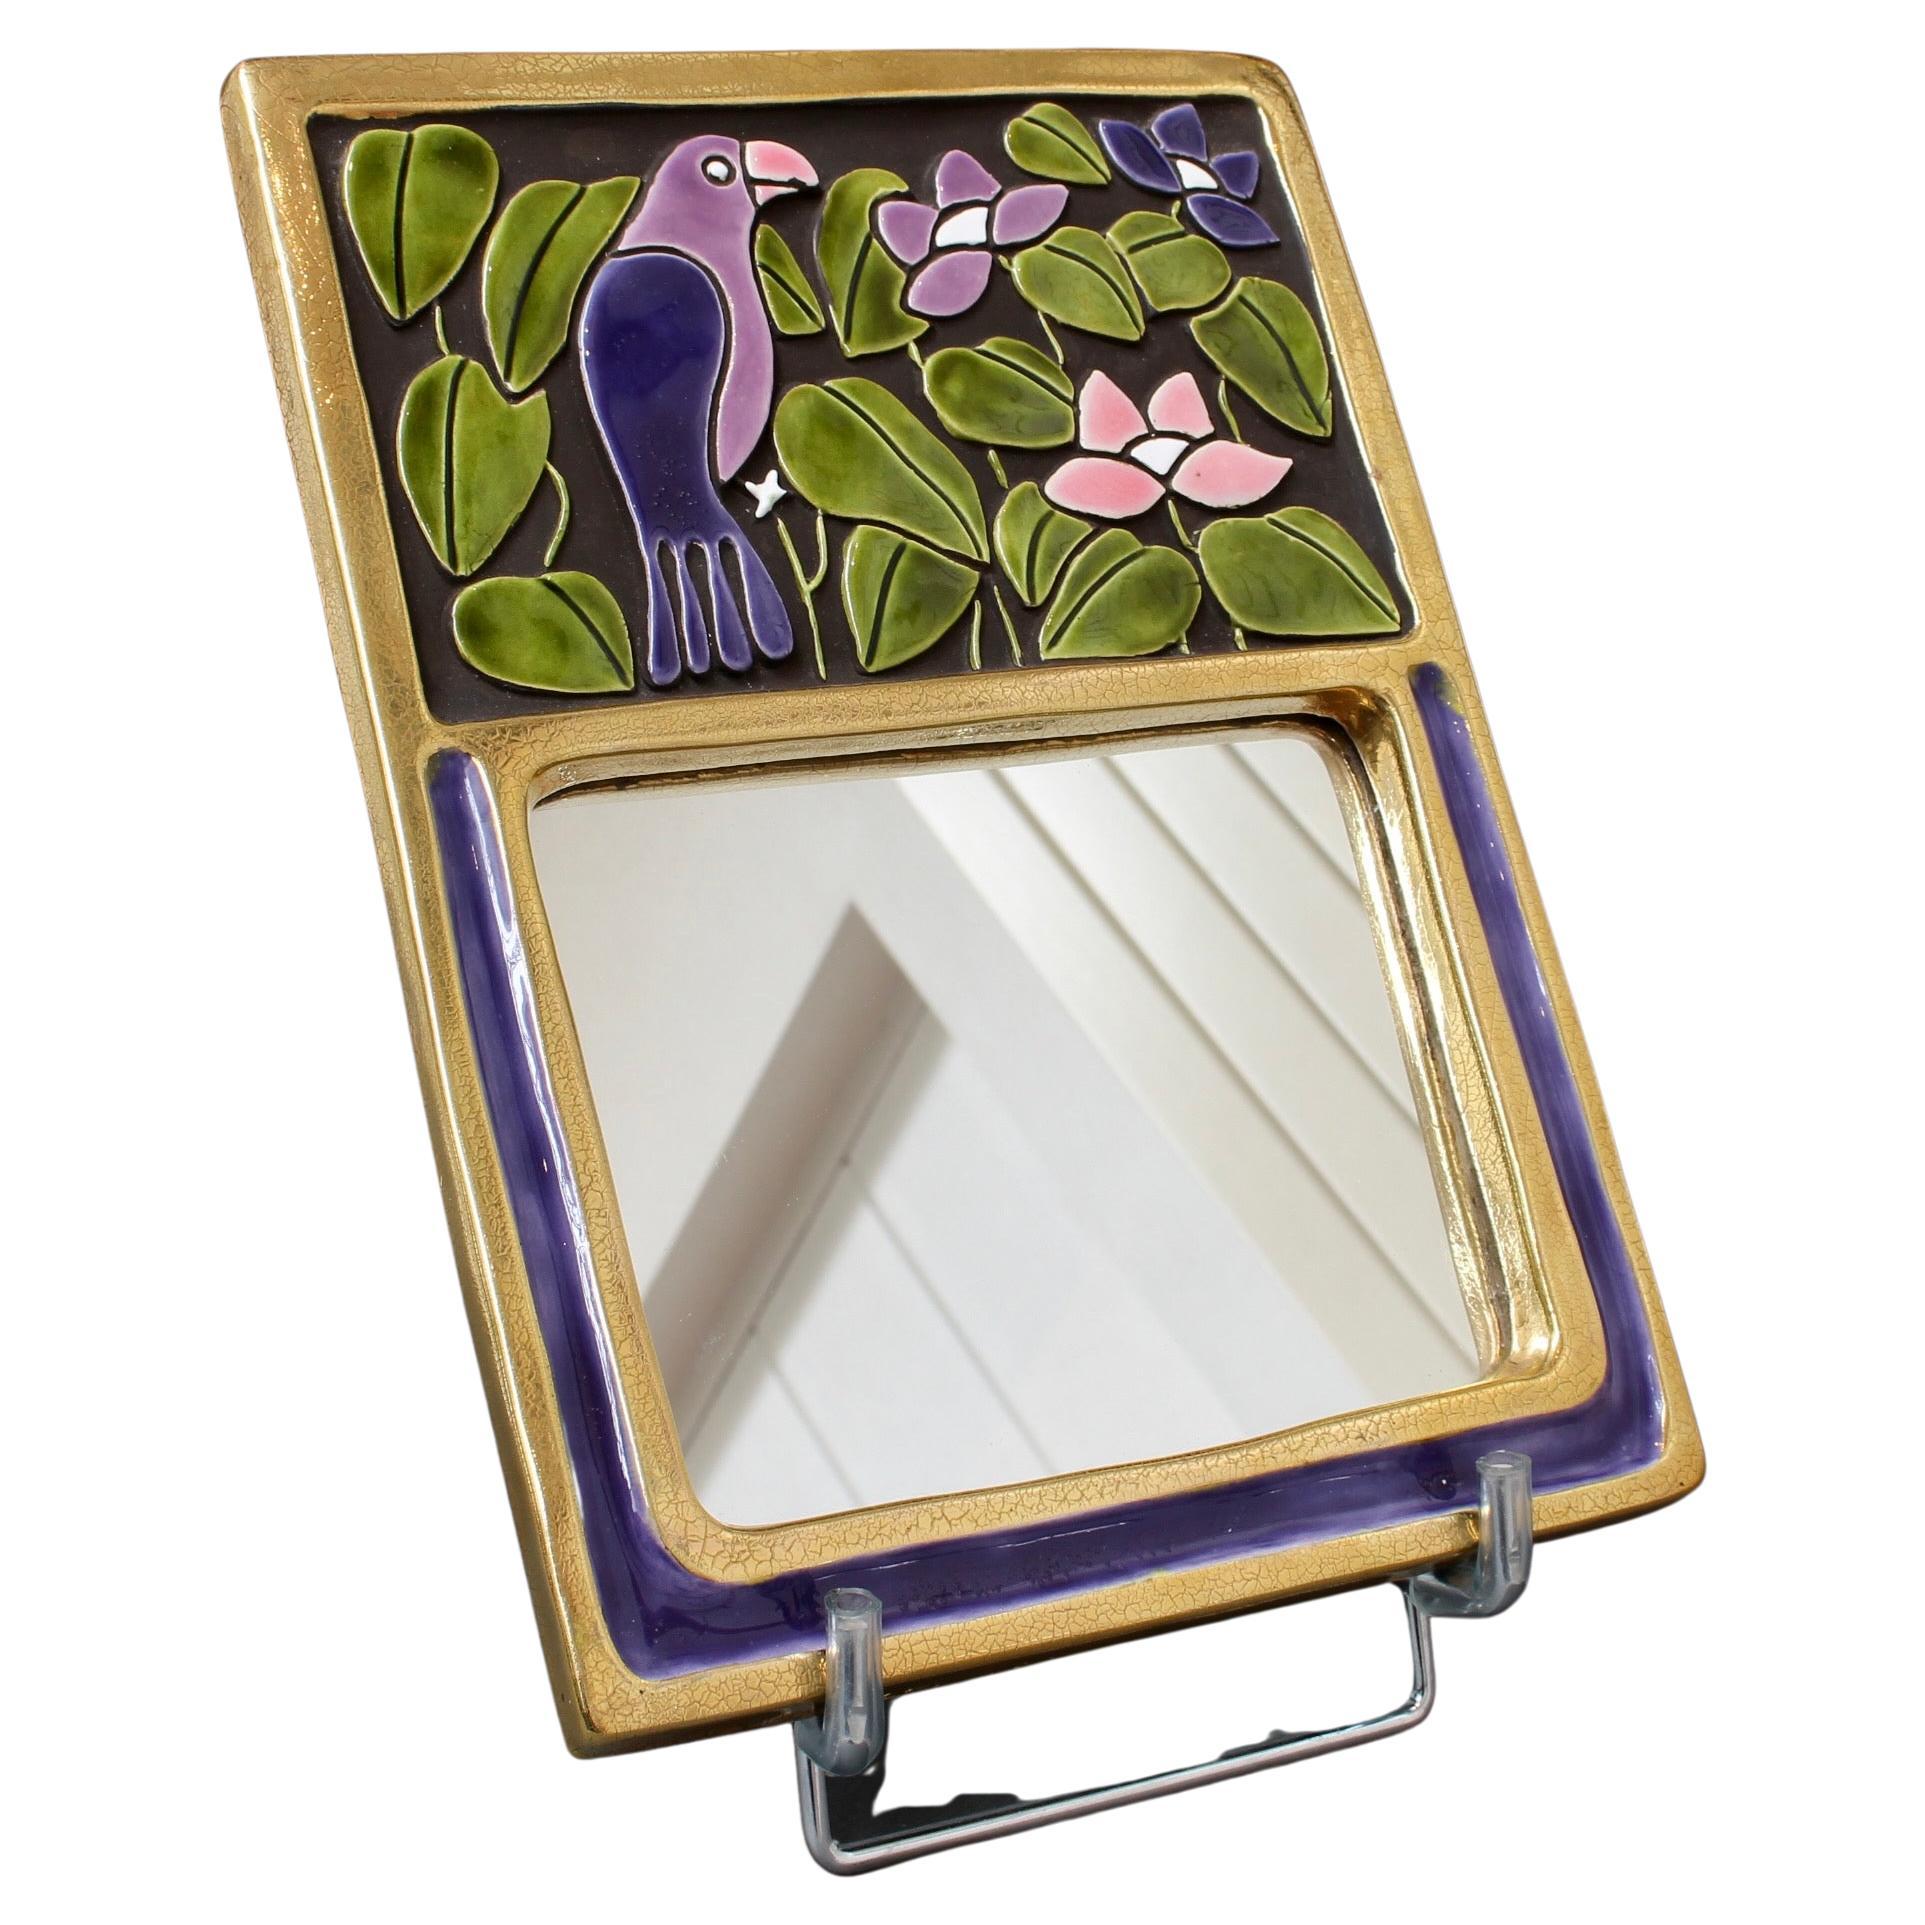 Ceramic wall mirror with purple and green glaze and stylised bird (circa 1970s) by Mithé Espelt. A delightful whimsical wall mirror decorated with a parrot perched amongst the flowers and greenery situated above the rectangular mirror. The mirror is